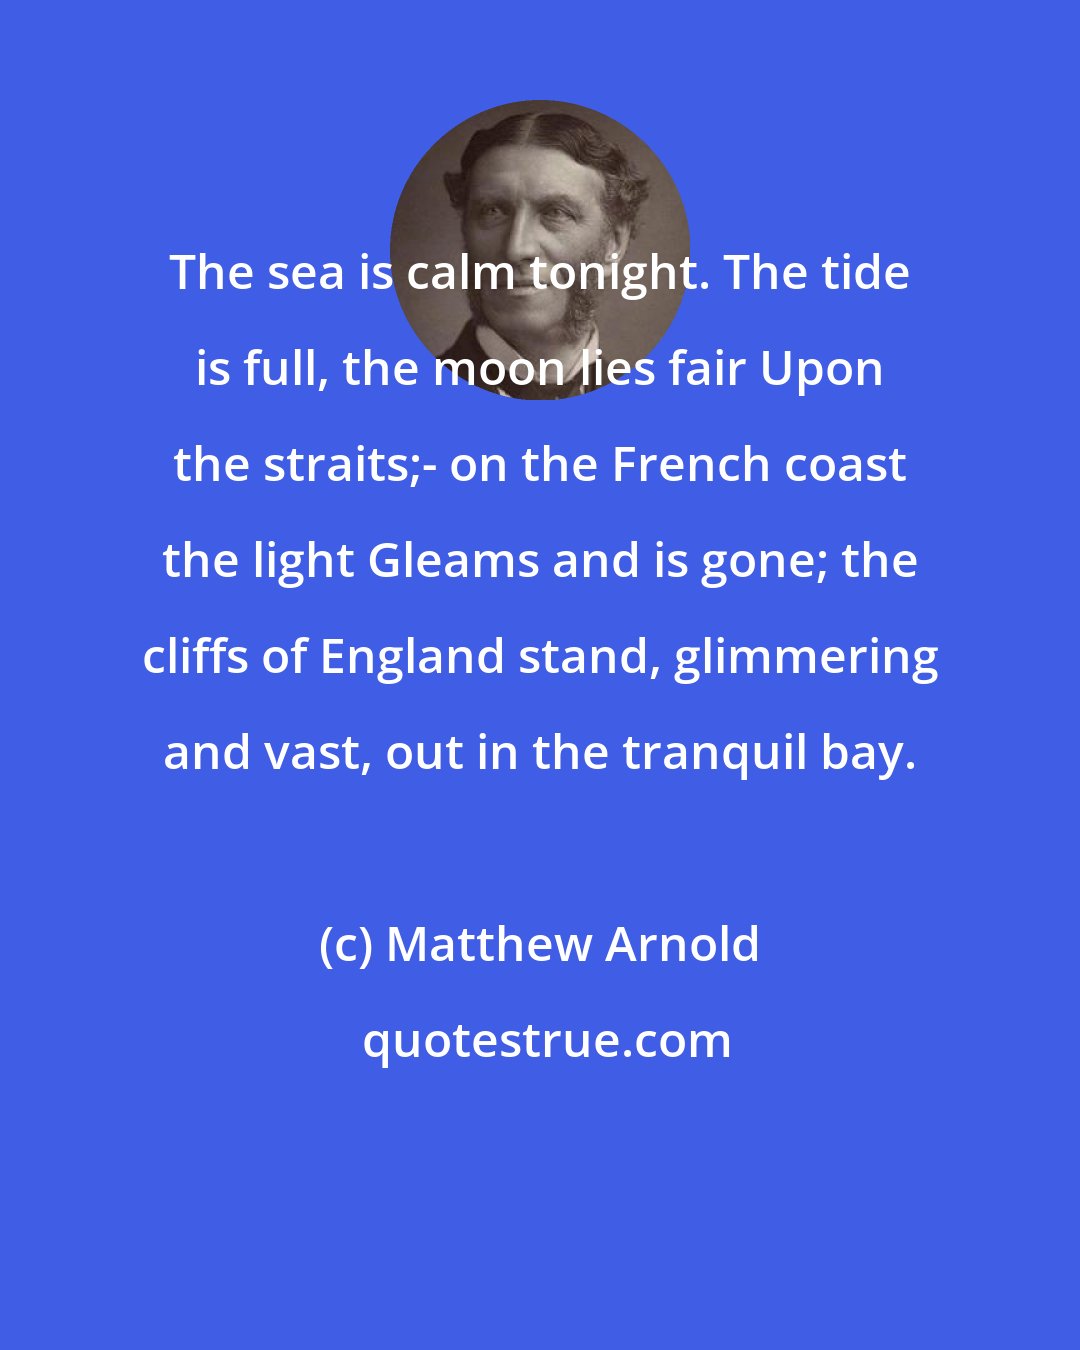 Matthew Arnold: The sea is calm tonight. The tide is full, the moon lies fair Upon the straits;- on the French coast the light Gleams and is gone; the cliffs of England stand, glimmering and vast, out in the tranquil bay.